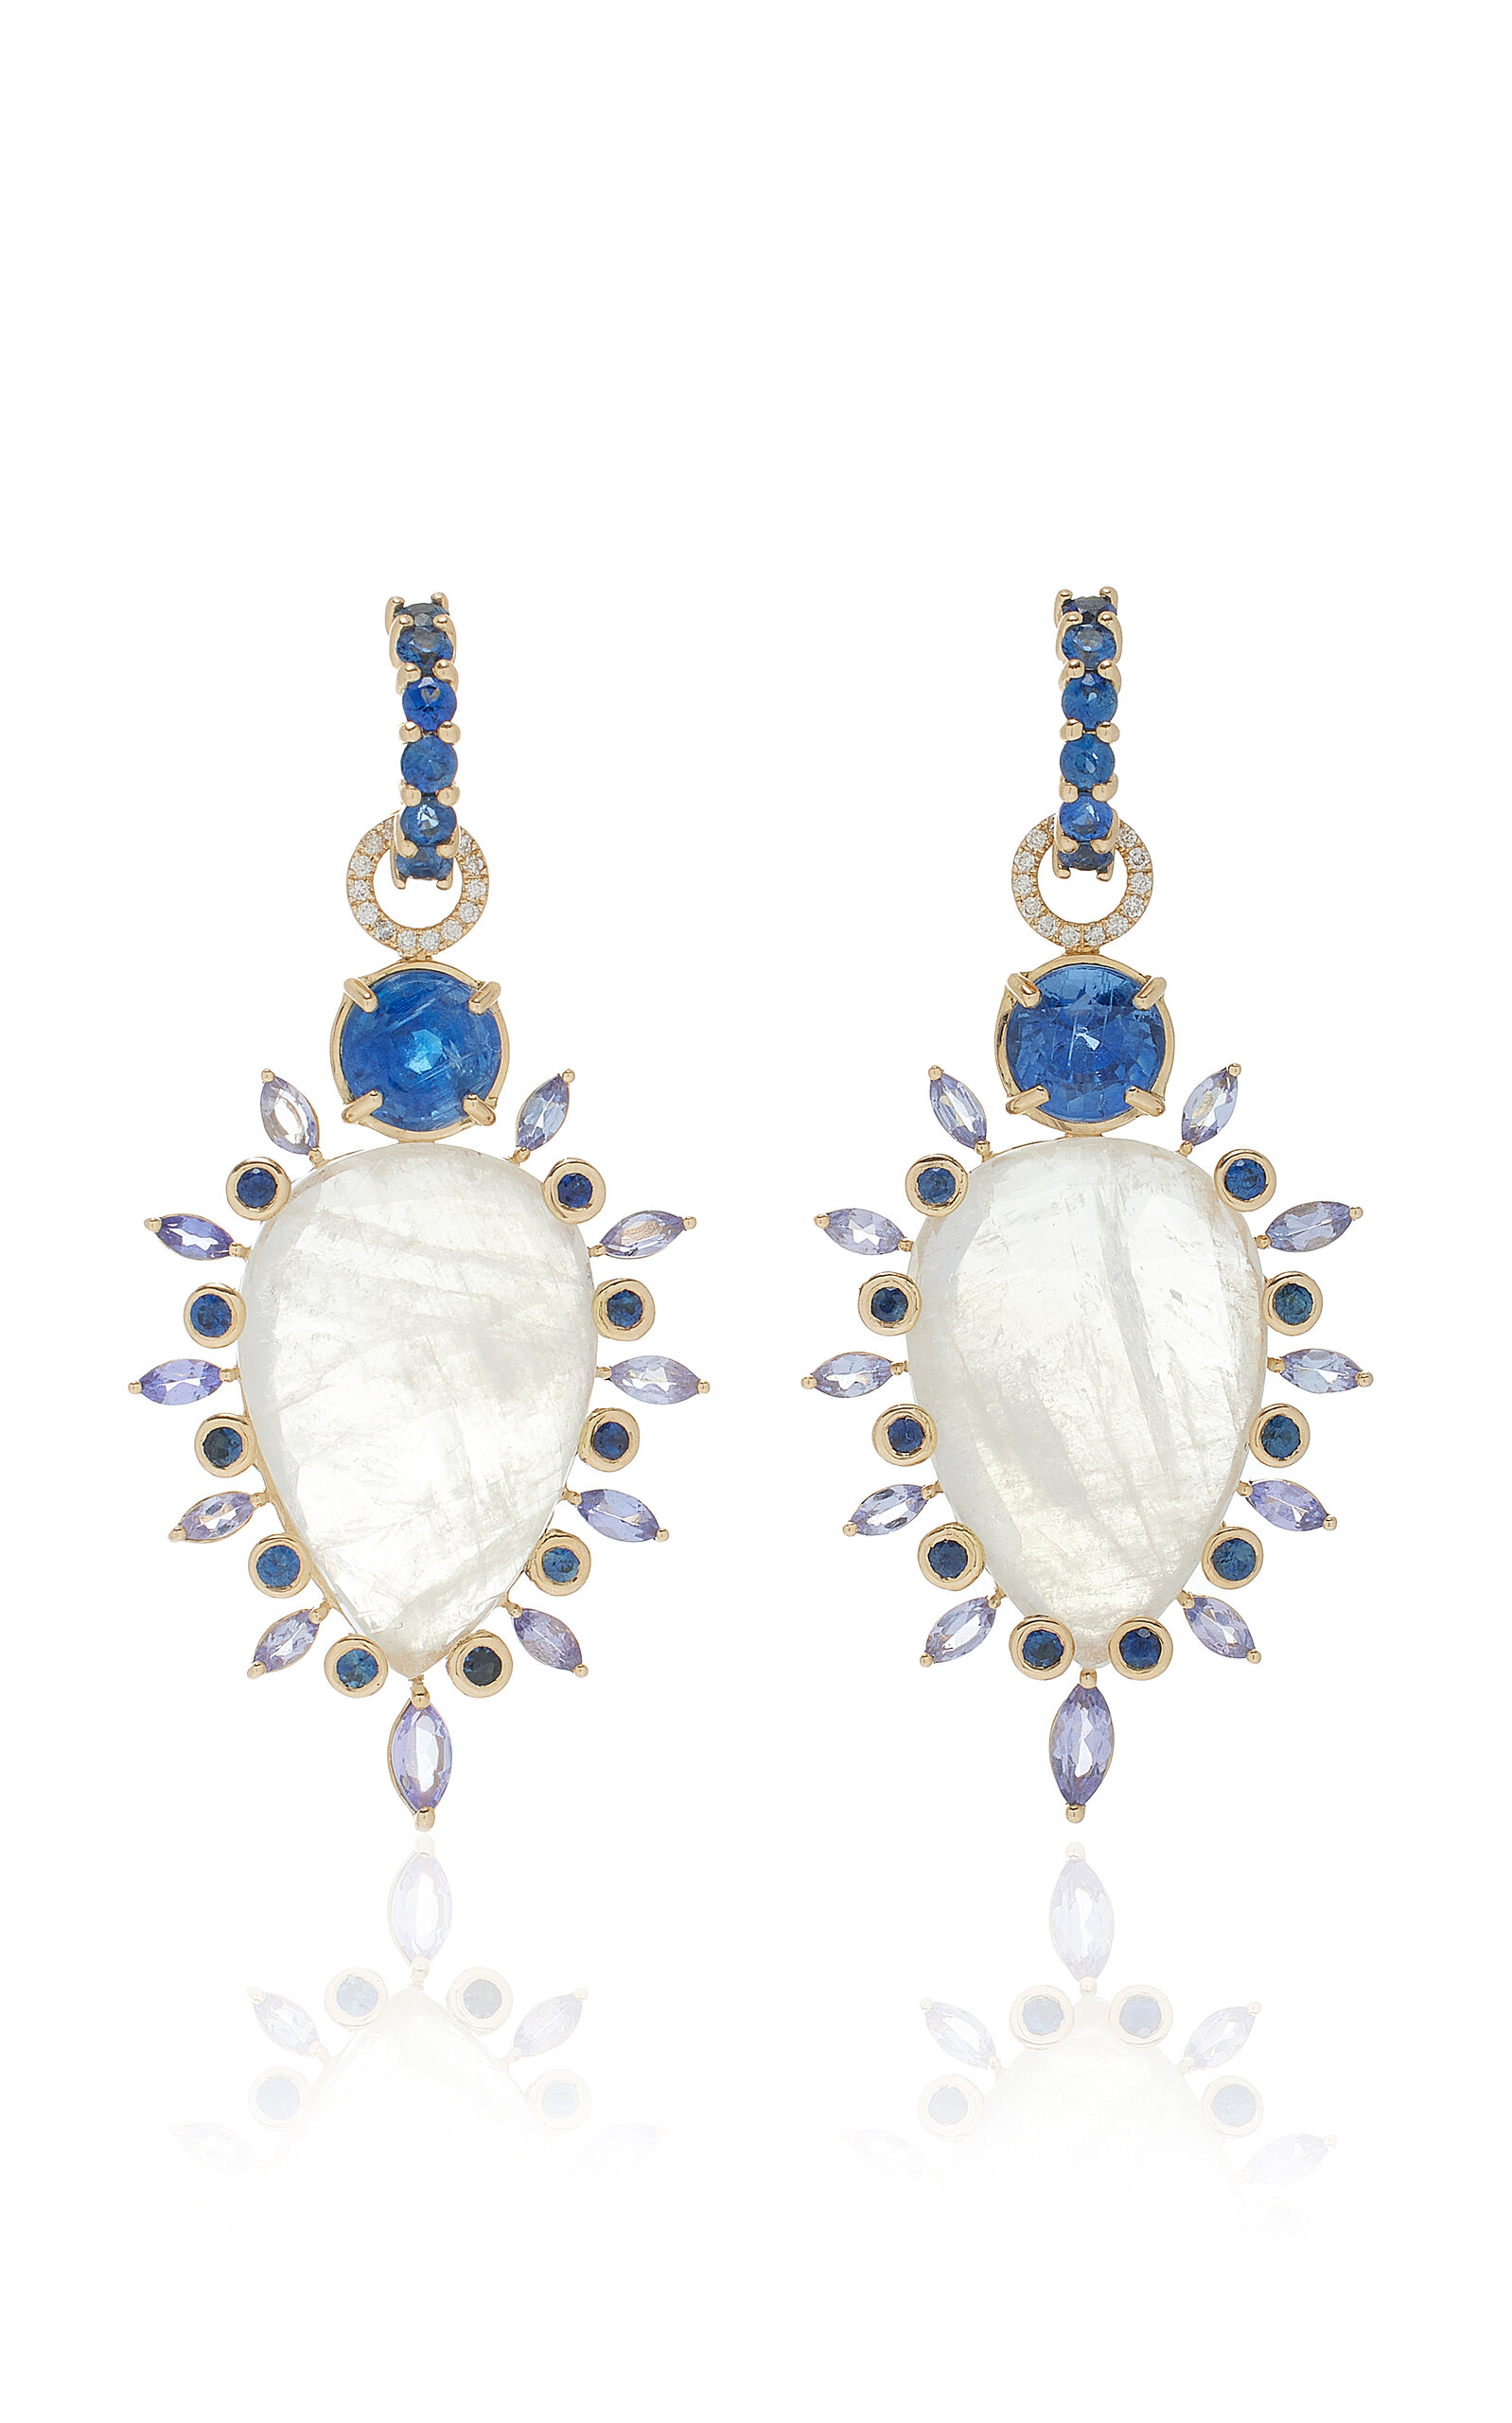 One-of-a-Kind 14K Yellow Gold Moonstone Earrings